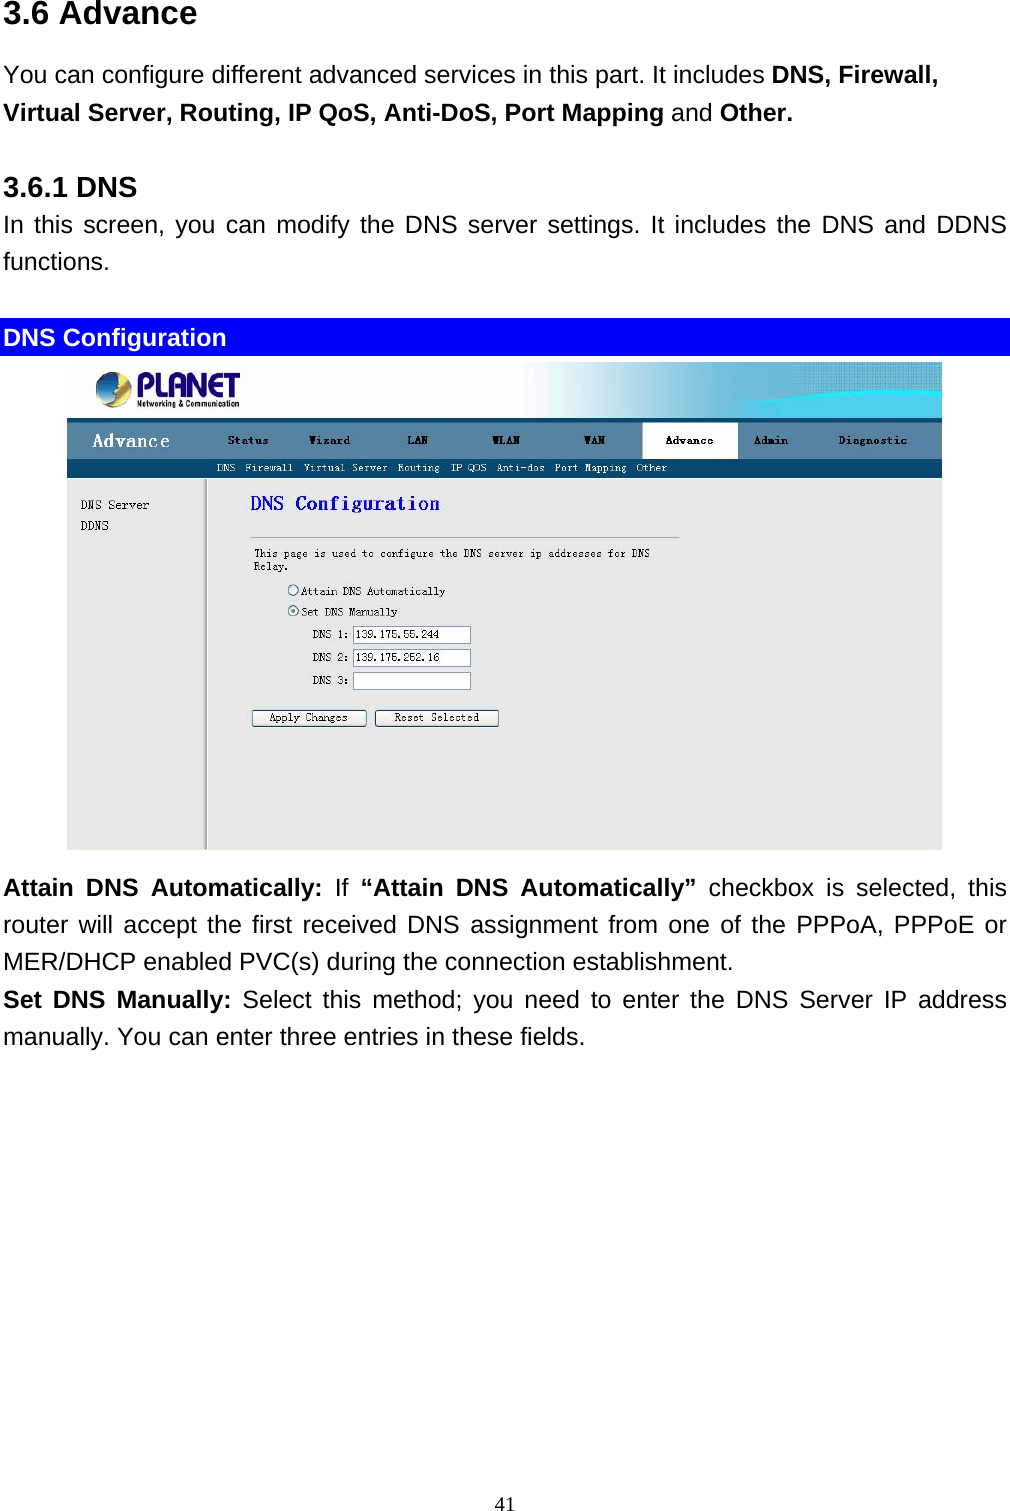 3.6 Advance You can configure different advanced services in this part. It includes DNS, Firewall, Virtual Server, Routing, IP QoS, Anti-DoS, Port Mapping and Other. 3.6.1 DNS In this screen, you can modify the DNS server settings. It includes the DNS and DDNS functions.  DNS Configuration  Attain DNS Automatically: If “Attain DNS Automatically” checkbox is selected, this router will accept the first received DNS assignment from one of the PPPoA, PPPoE or MER/DHCP enabled PVC(s) during the connection establishment.   Set DNS Manually: Select this method; you need to enter the DNS Server IP address manually. You can enter three entries in these fields.    41 